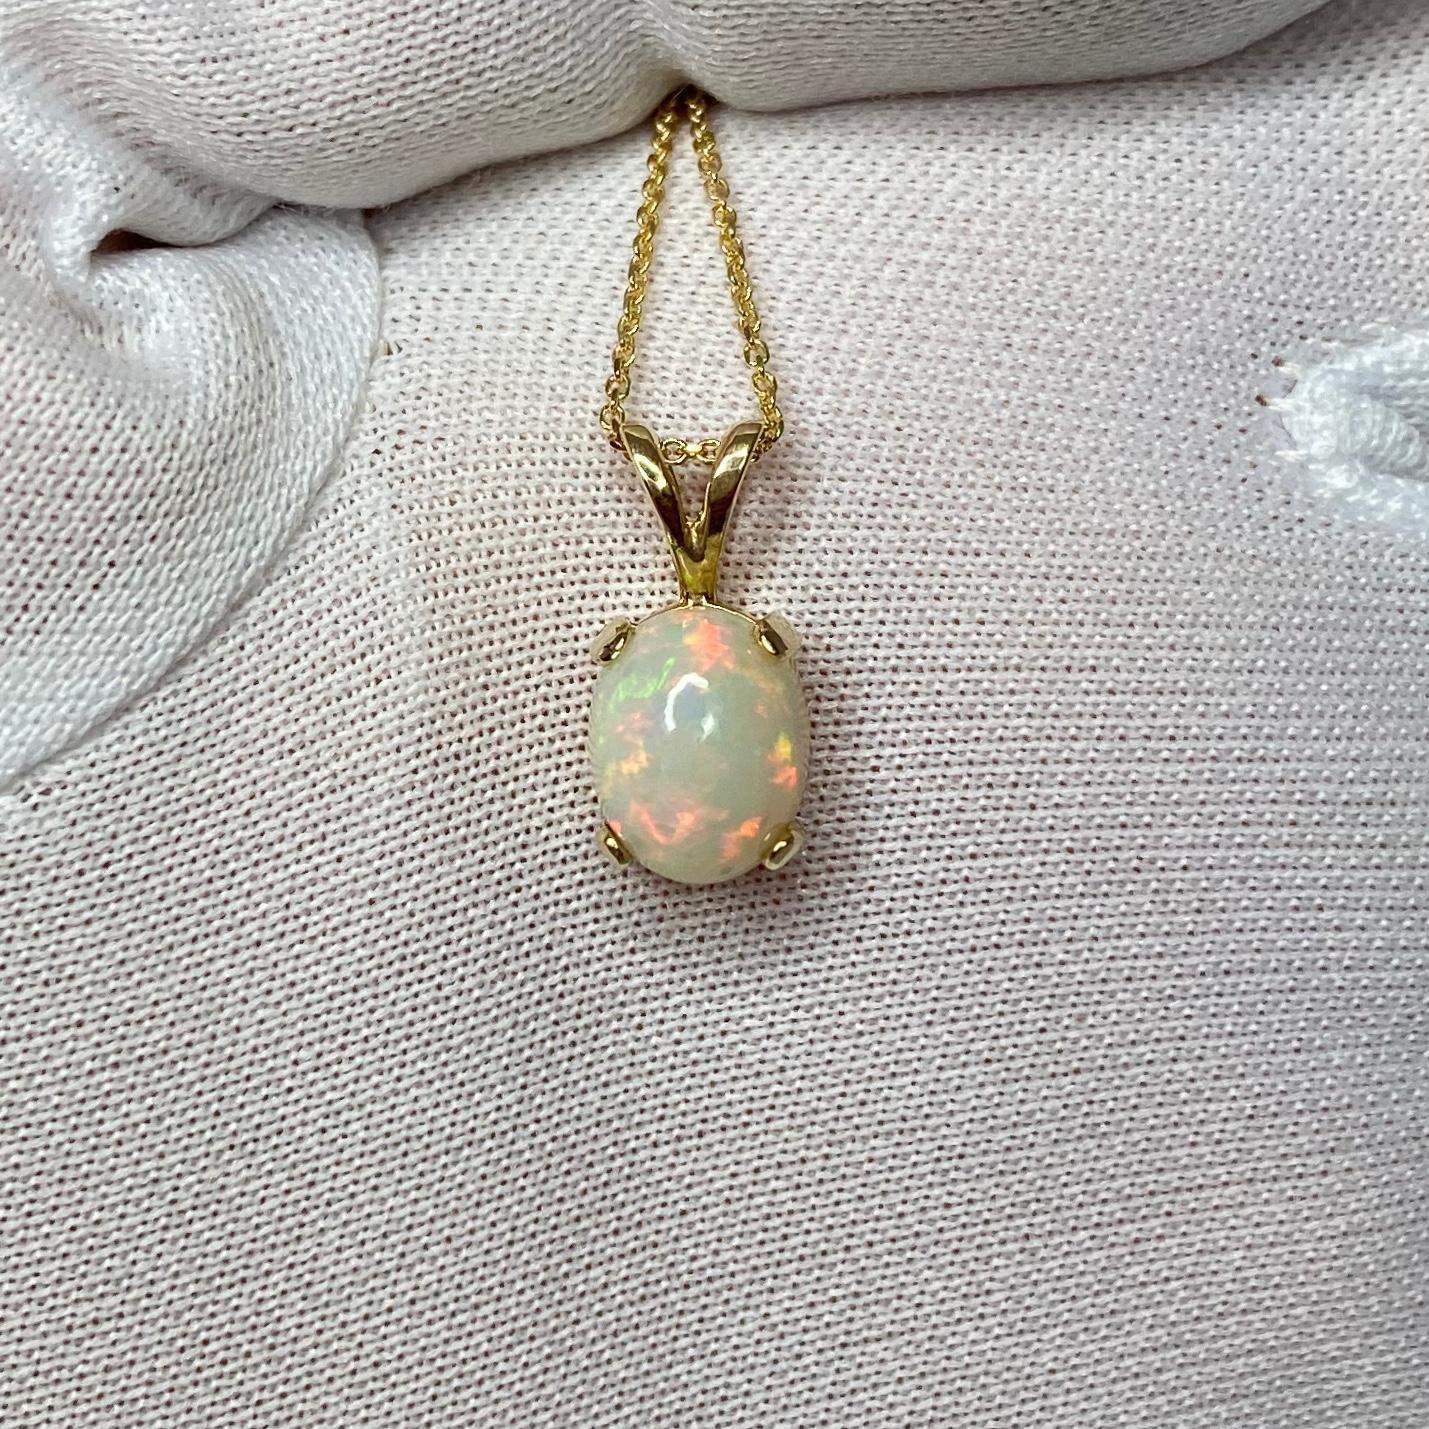 Beautiful white opal with stunning play of colour set in a fine 14k yellow gold solitaire pendant.

Stunning Welo opal with an excellent polish and lots of colour flash. Blues, greens, oranges, yellow, purple, reds... this stone is filled with